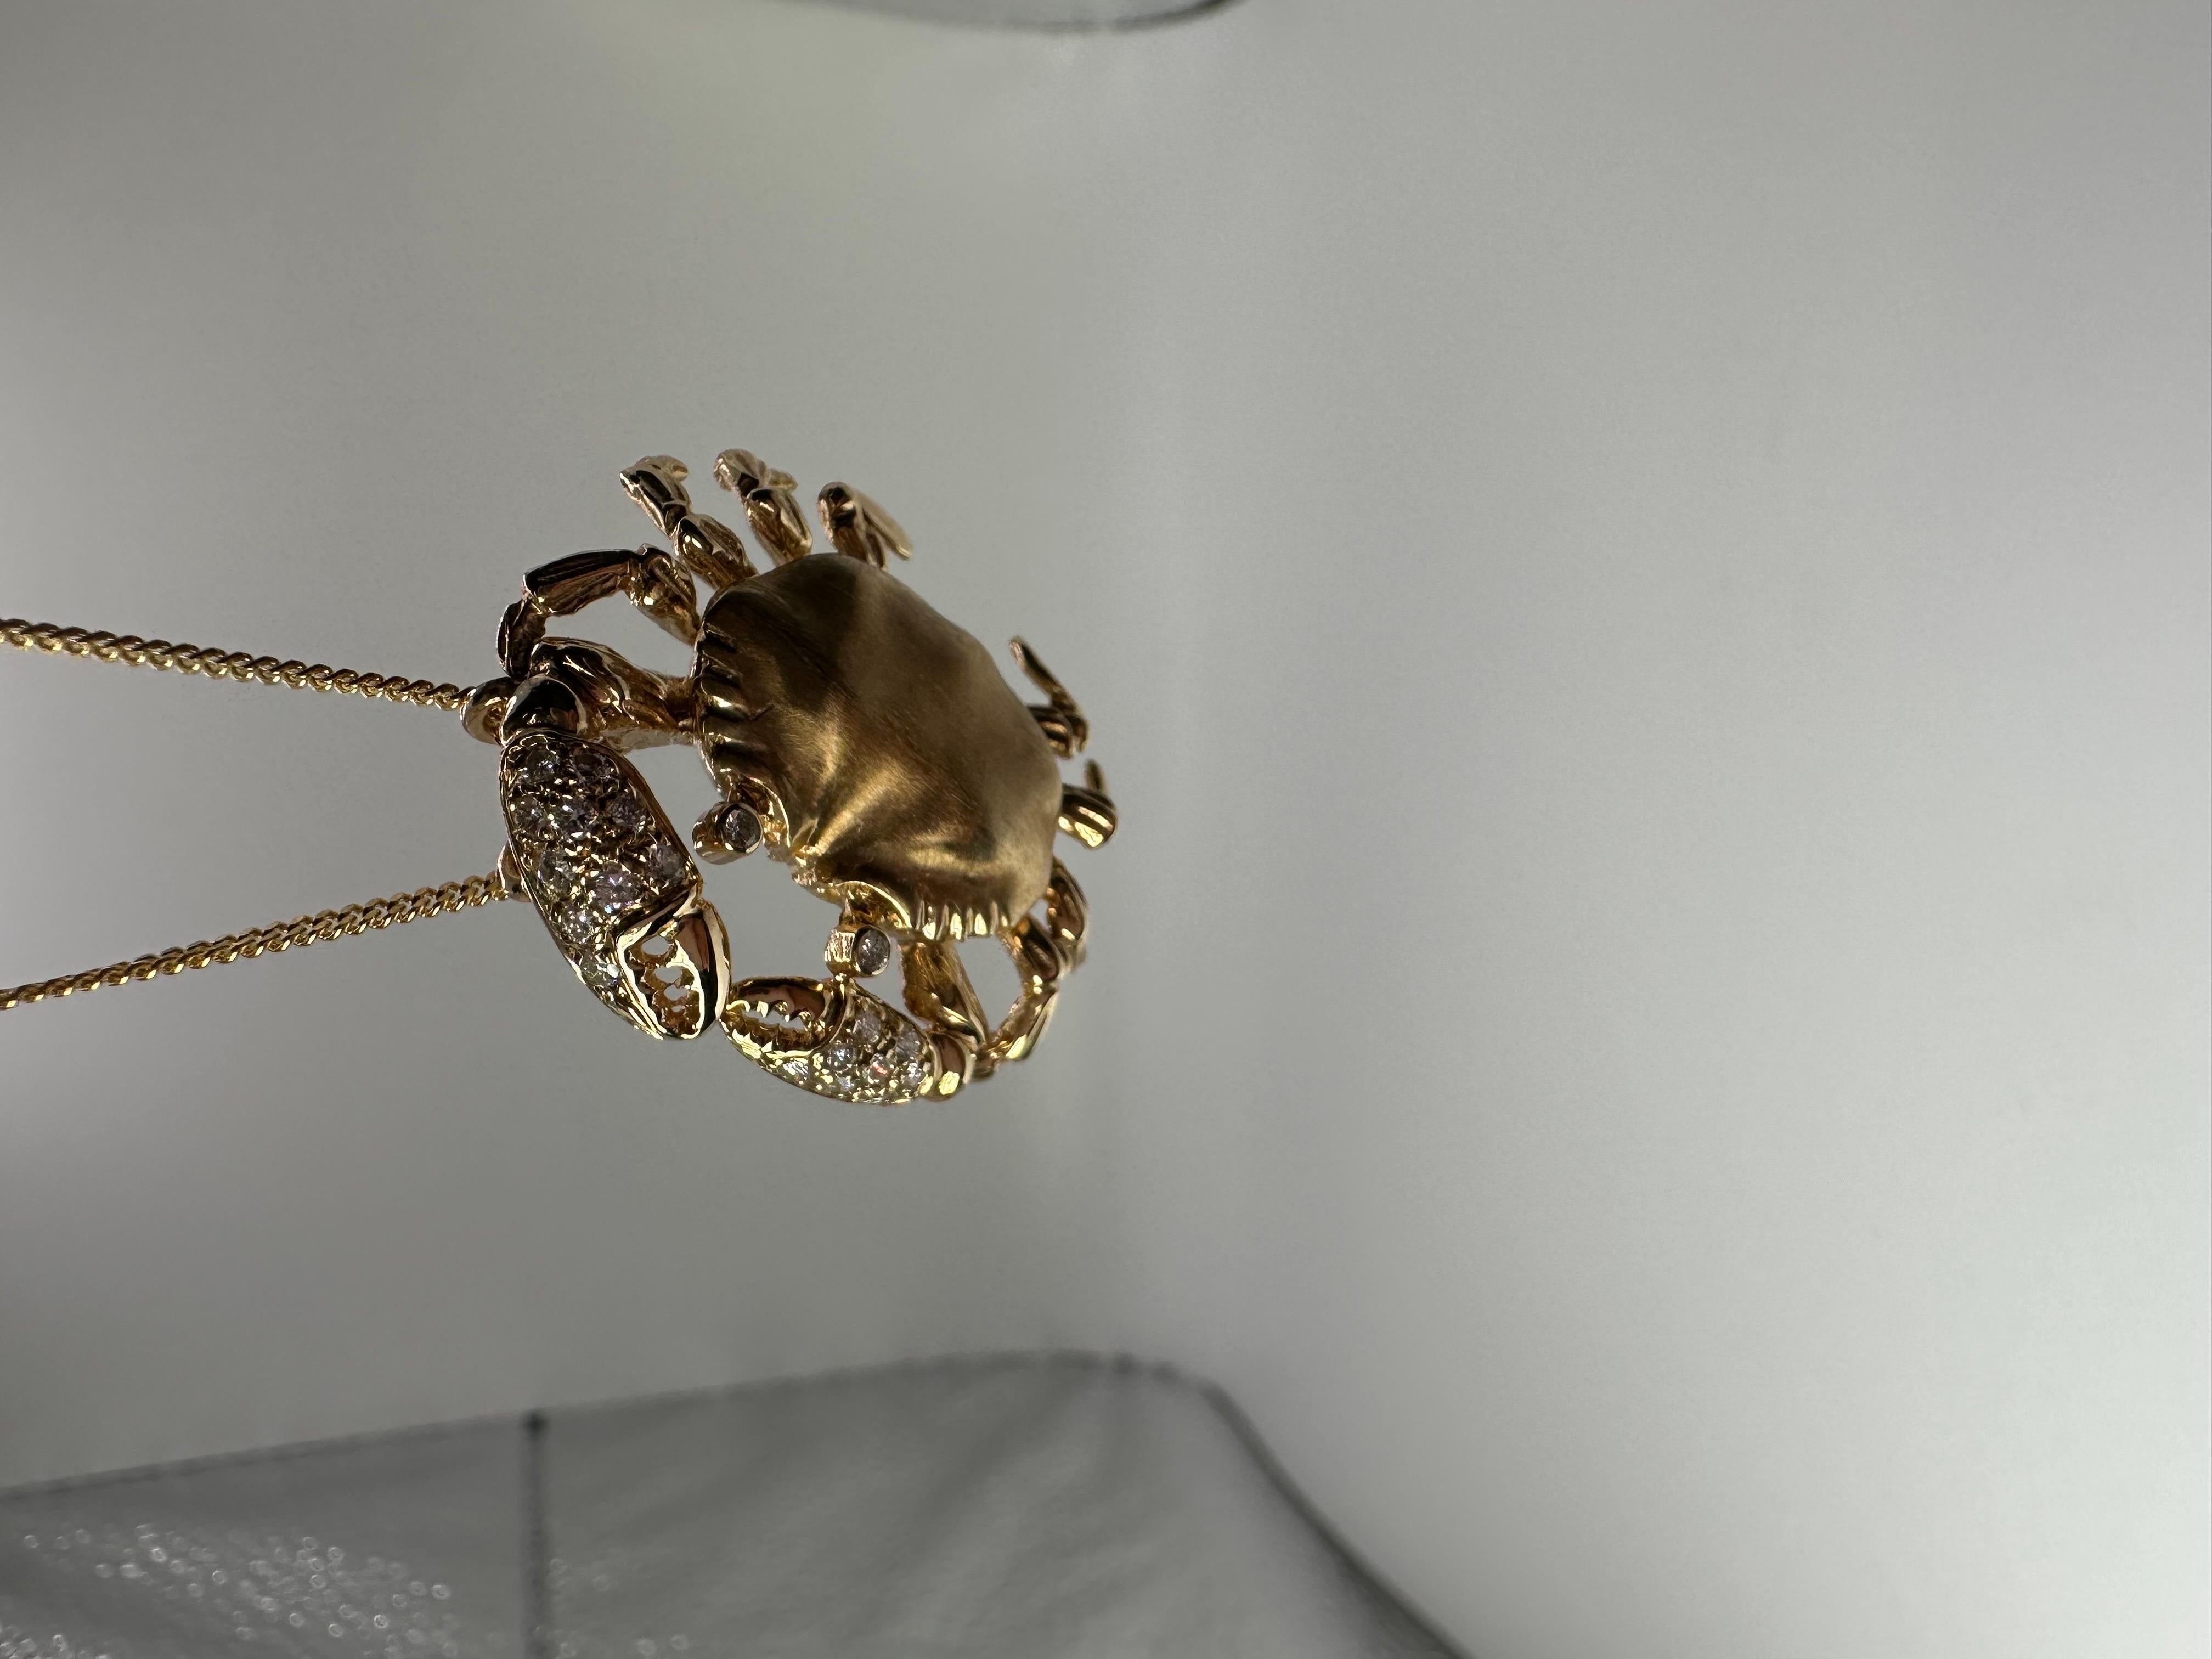 Unique custom crab made in 14KT matte gold with fine diamonds.

GOLD: 14KT gold
NATURAL DIAMOND(S)
Clarity/Color: SI/GH
Carat:0.20ct
Grams:7.25
Item#: 160-00014 APM

WHAT YOU GET AT STAMPAR JEWELERS:
Stampar Jewelers, located in the heart of